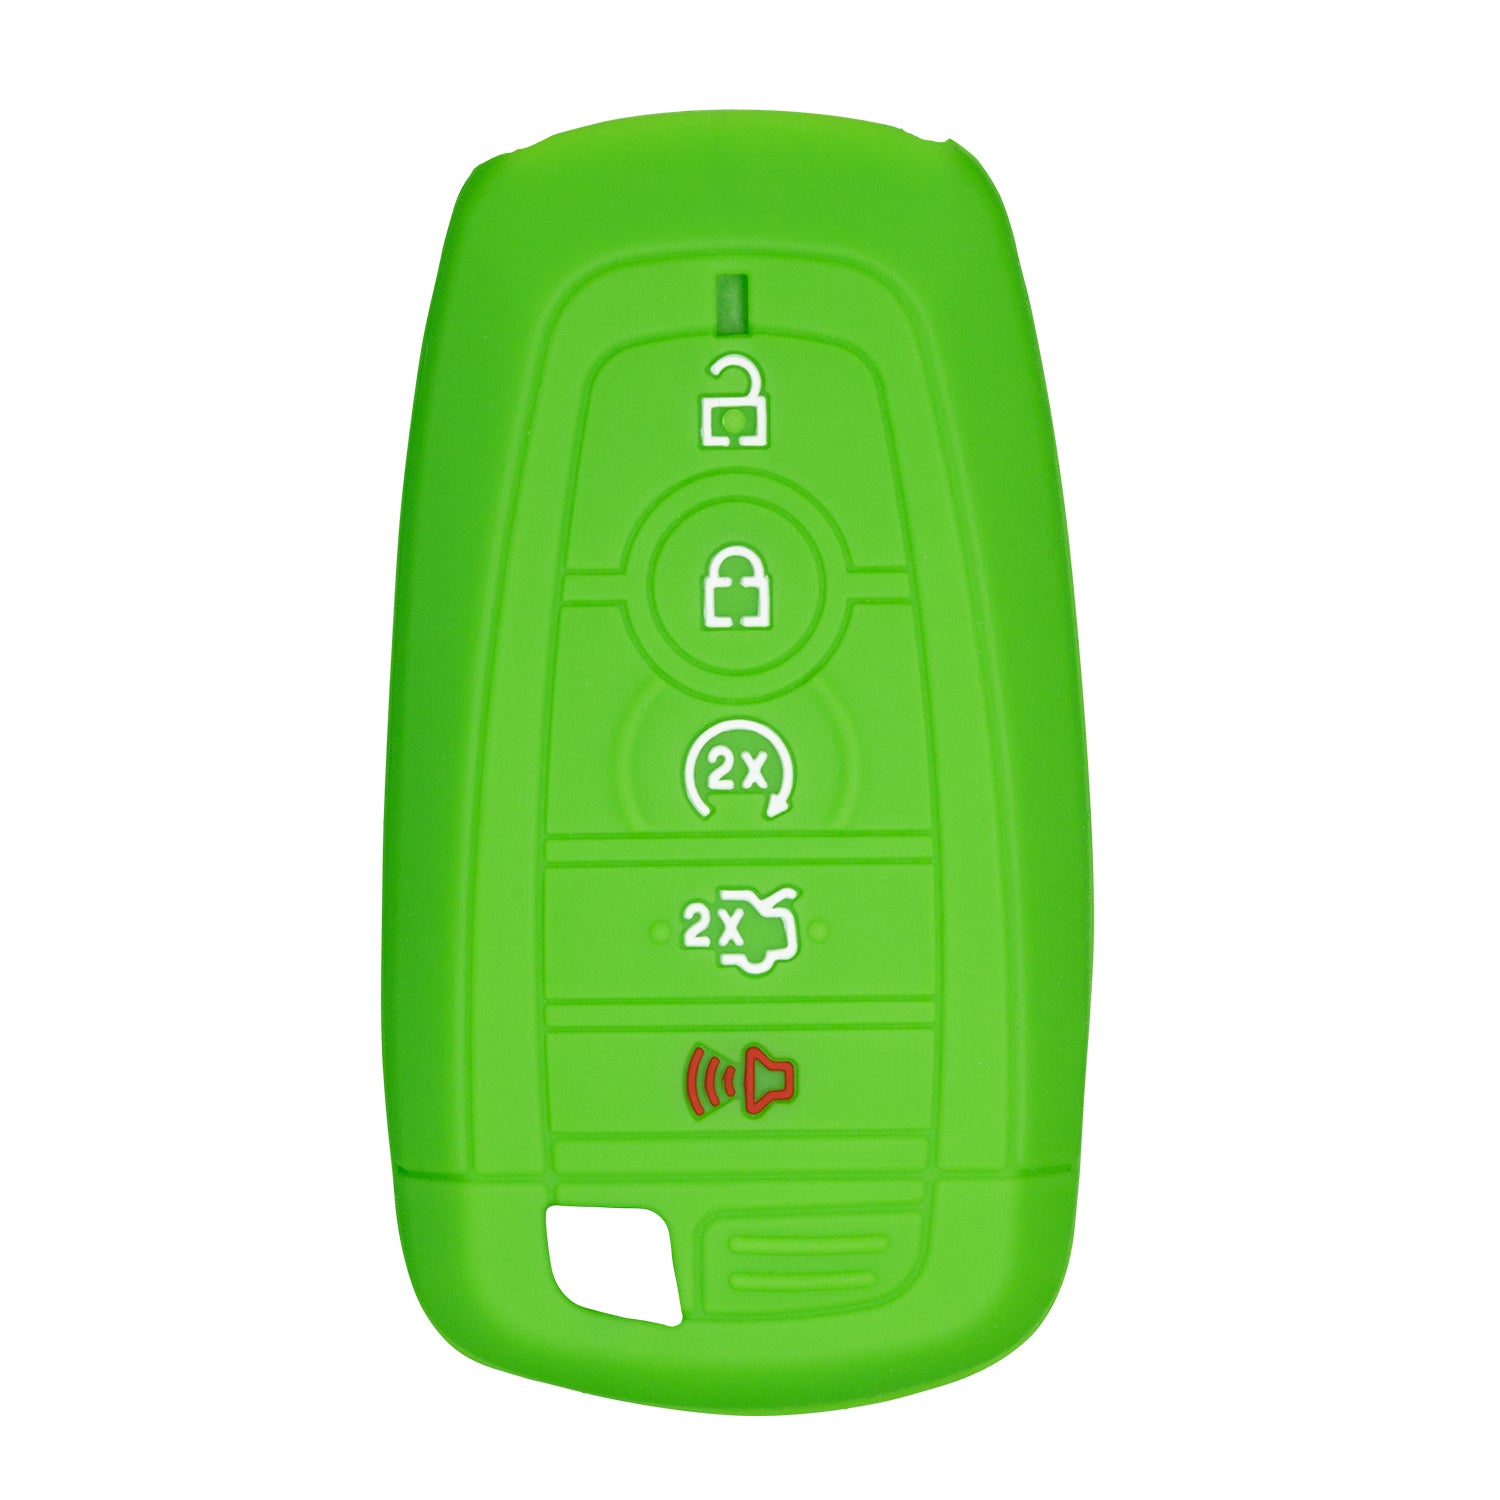 Silicone Case for Smart Key Remote Keyless Entry for Ford Fusion Explorer Edge Mustang Expedition M3N-A2C93142600 164-R8149 164R8149 R8149 (Green)